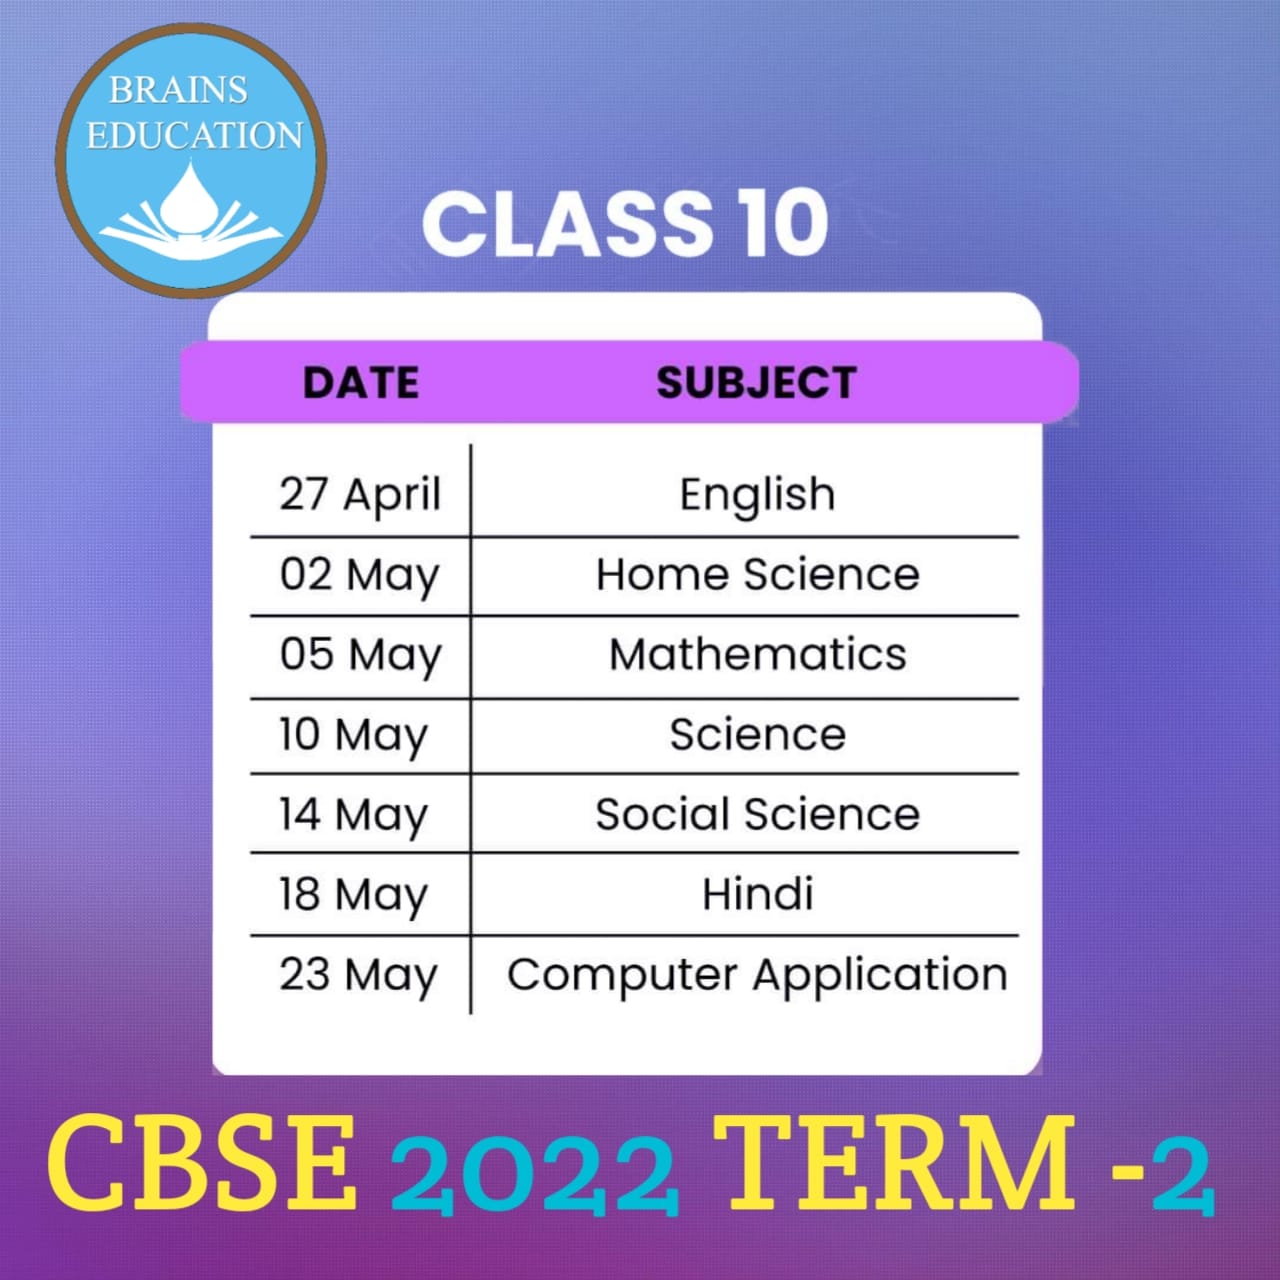 You are currently viewing class 10 term 2 exam date 2022